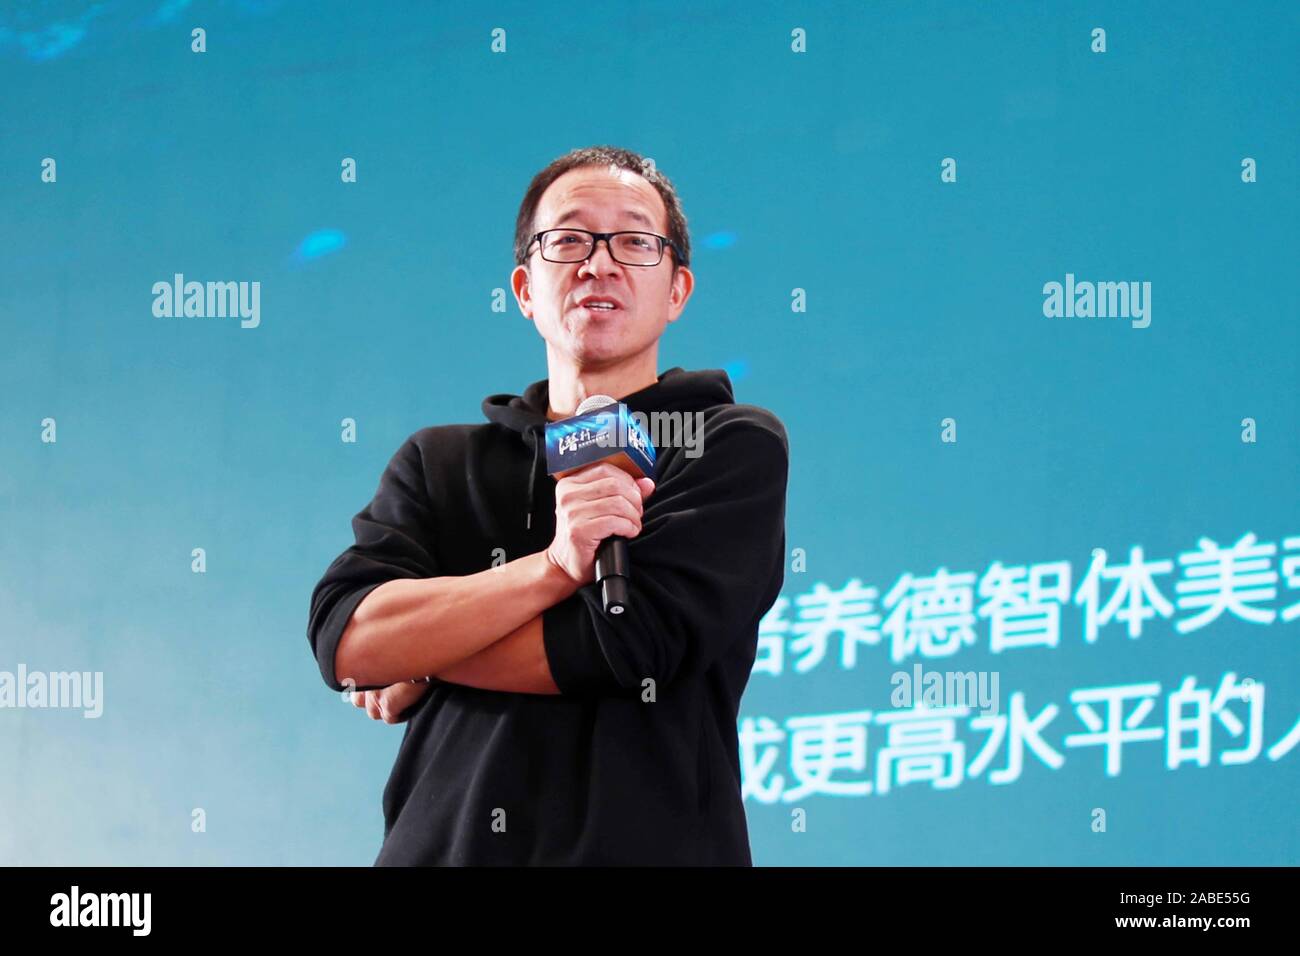 The Founder And President Of New Oriental Education Technology Group Inc Yu Minhong Also Known As Michael Yu Delivers A Speech At A Peer Advisory Stock Photo Alamy